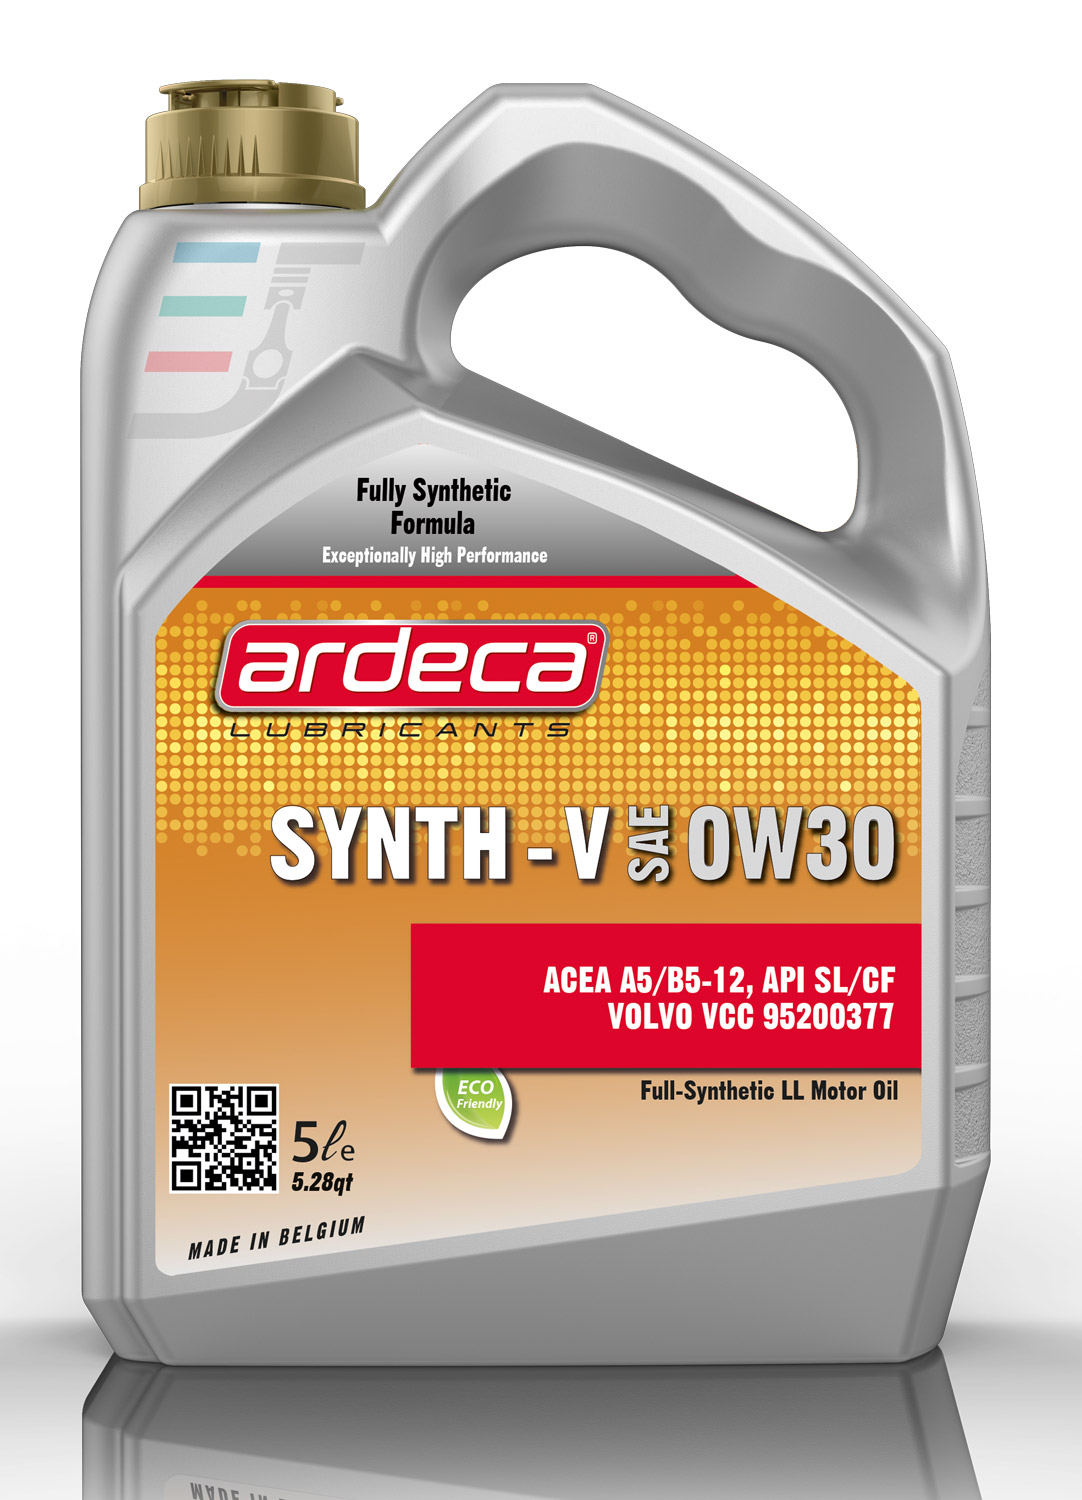 Масло 5w40 synth. Ardeca Synth-XL 5w40. Ardeca Synth-SX 5w-30. Ardeca 5w30. Масло Ardeca 5w30.